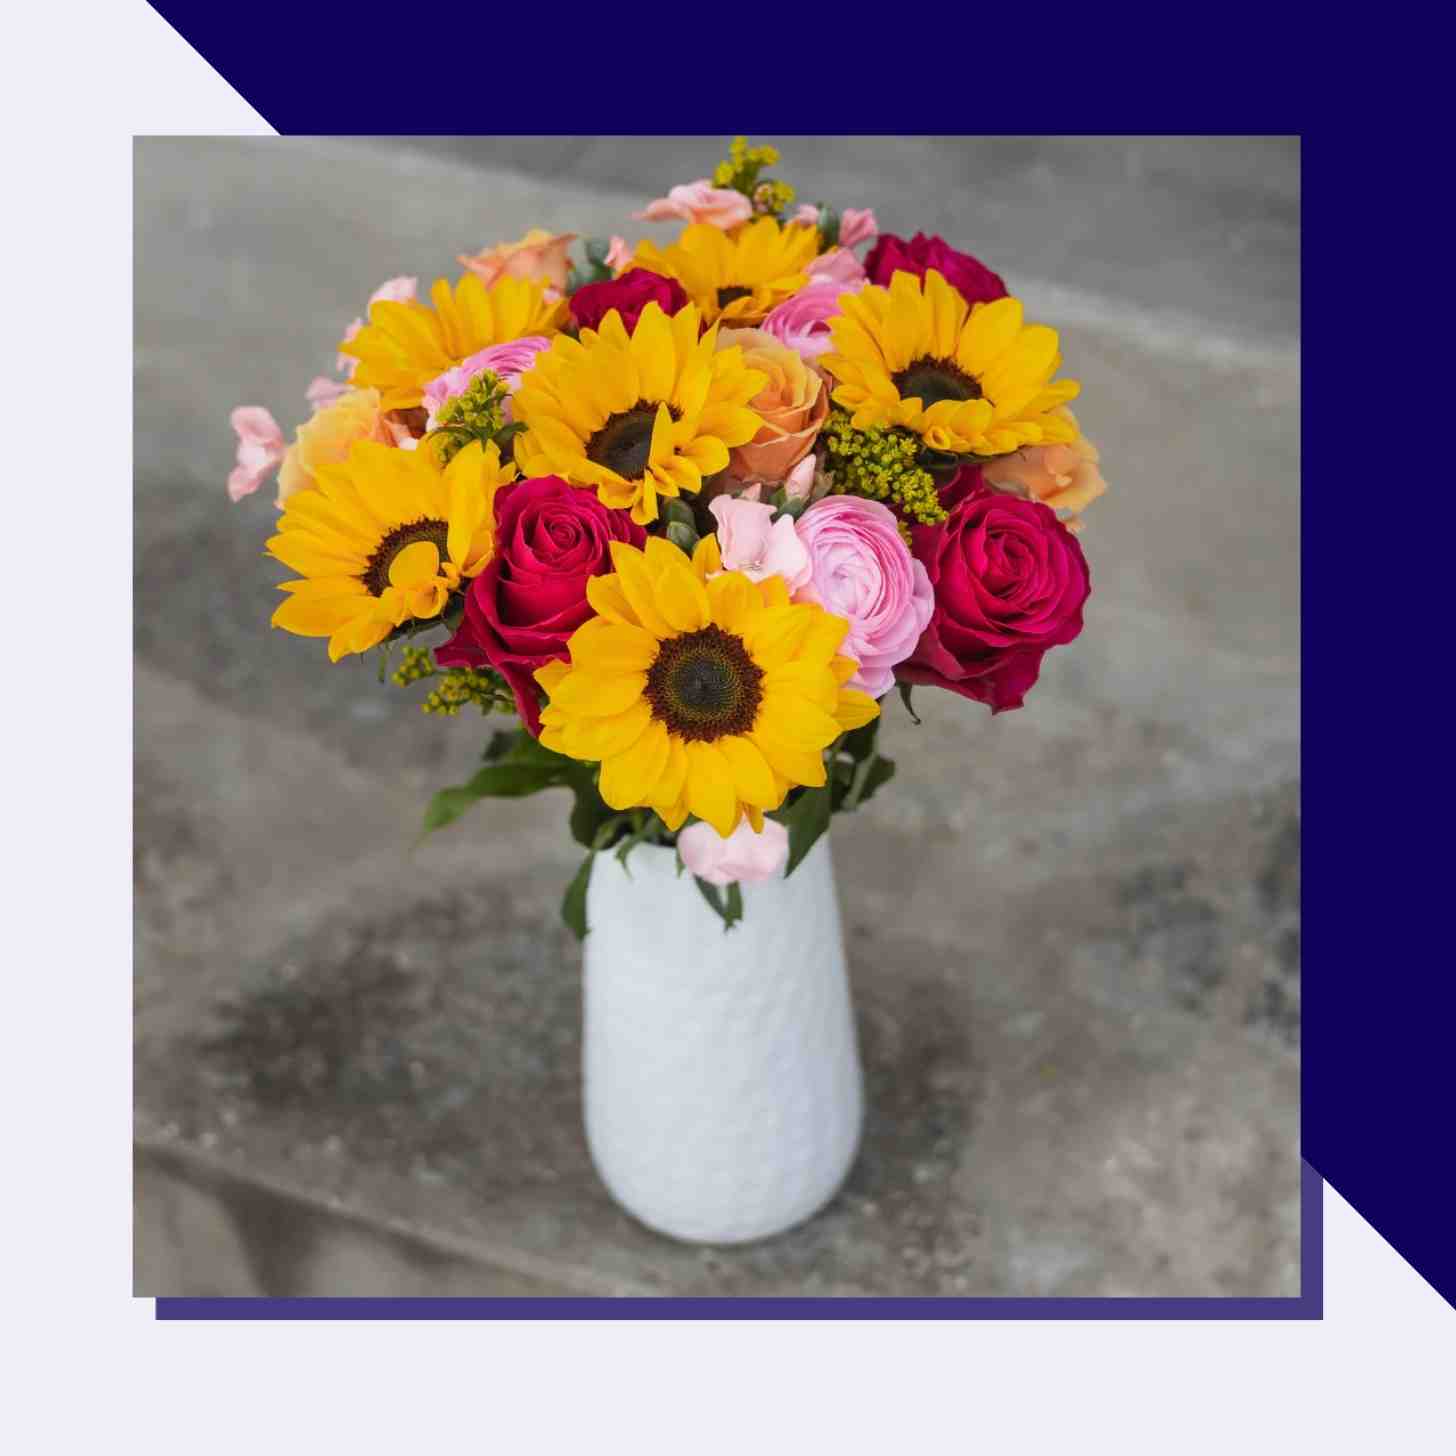 An Eco-Friendly Flower Vase with A bouquet of Roses And Sunflowers